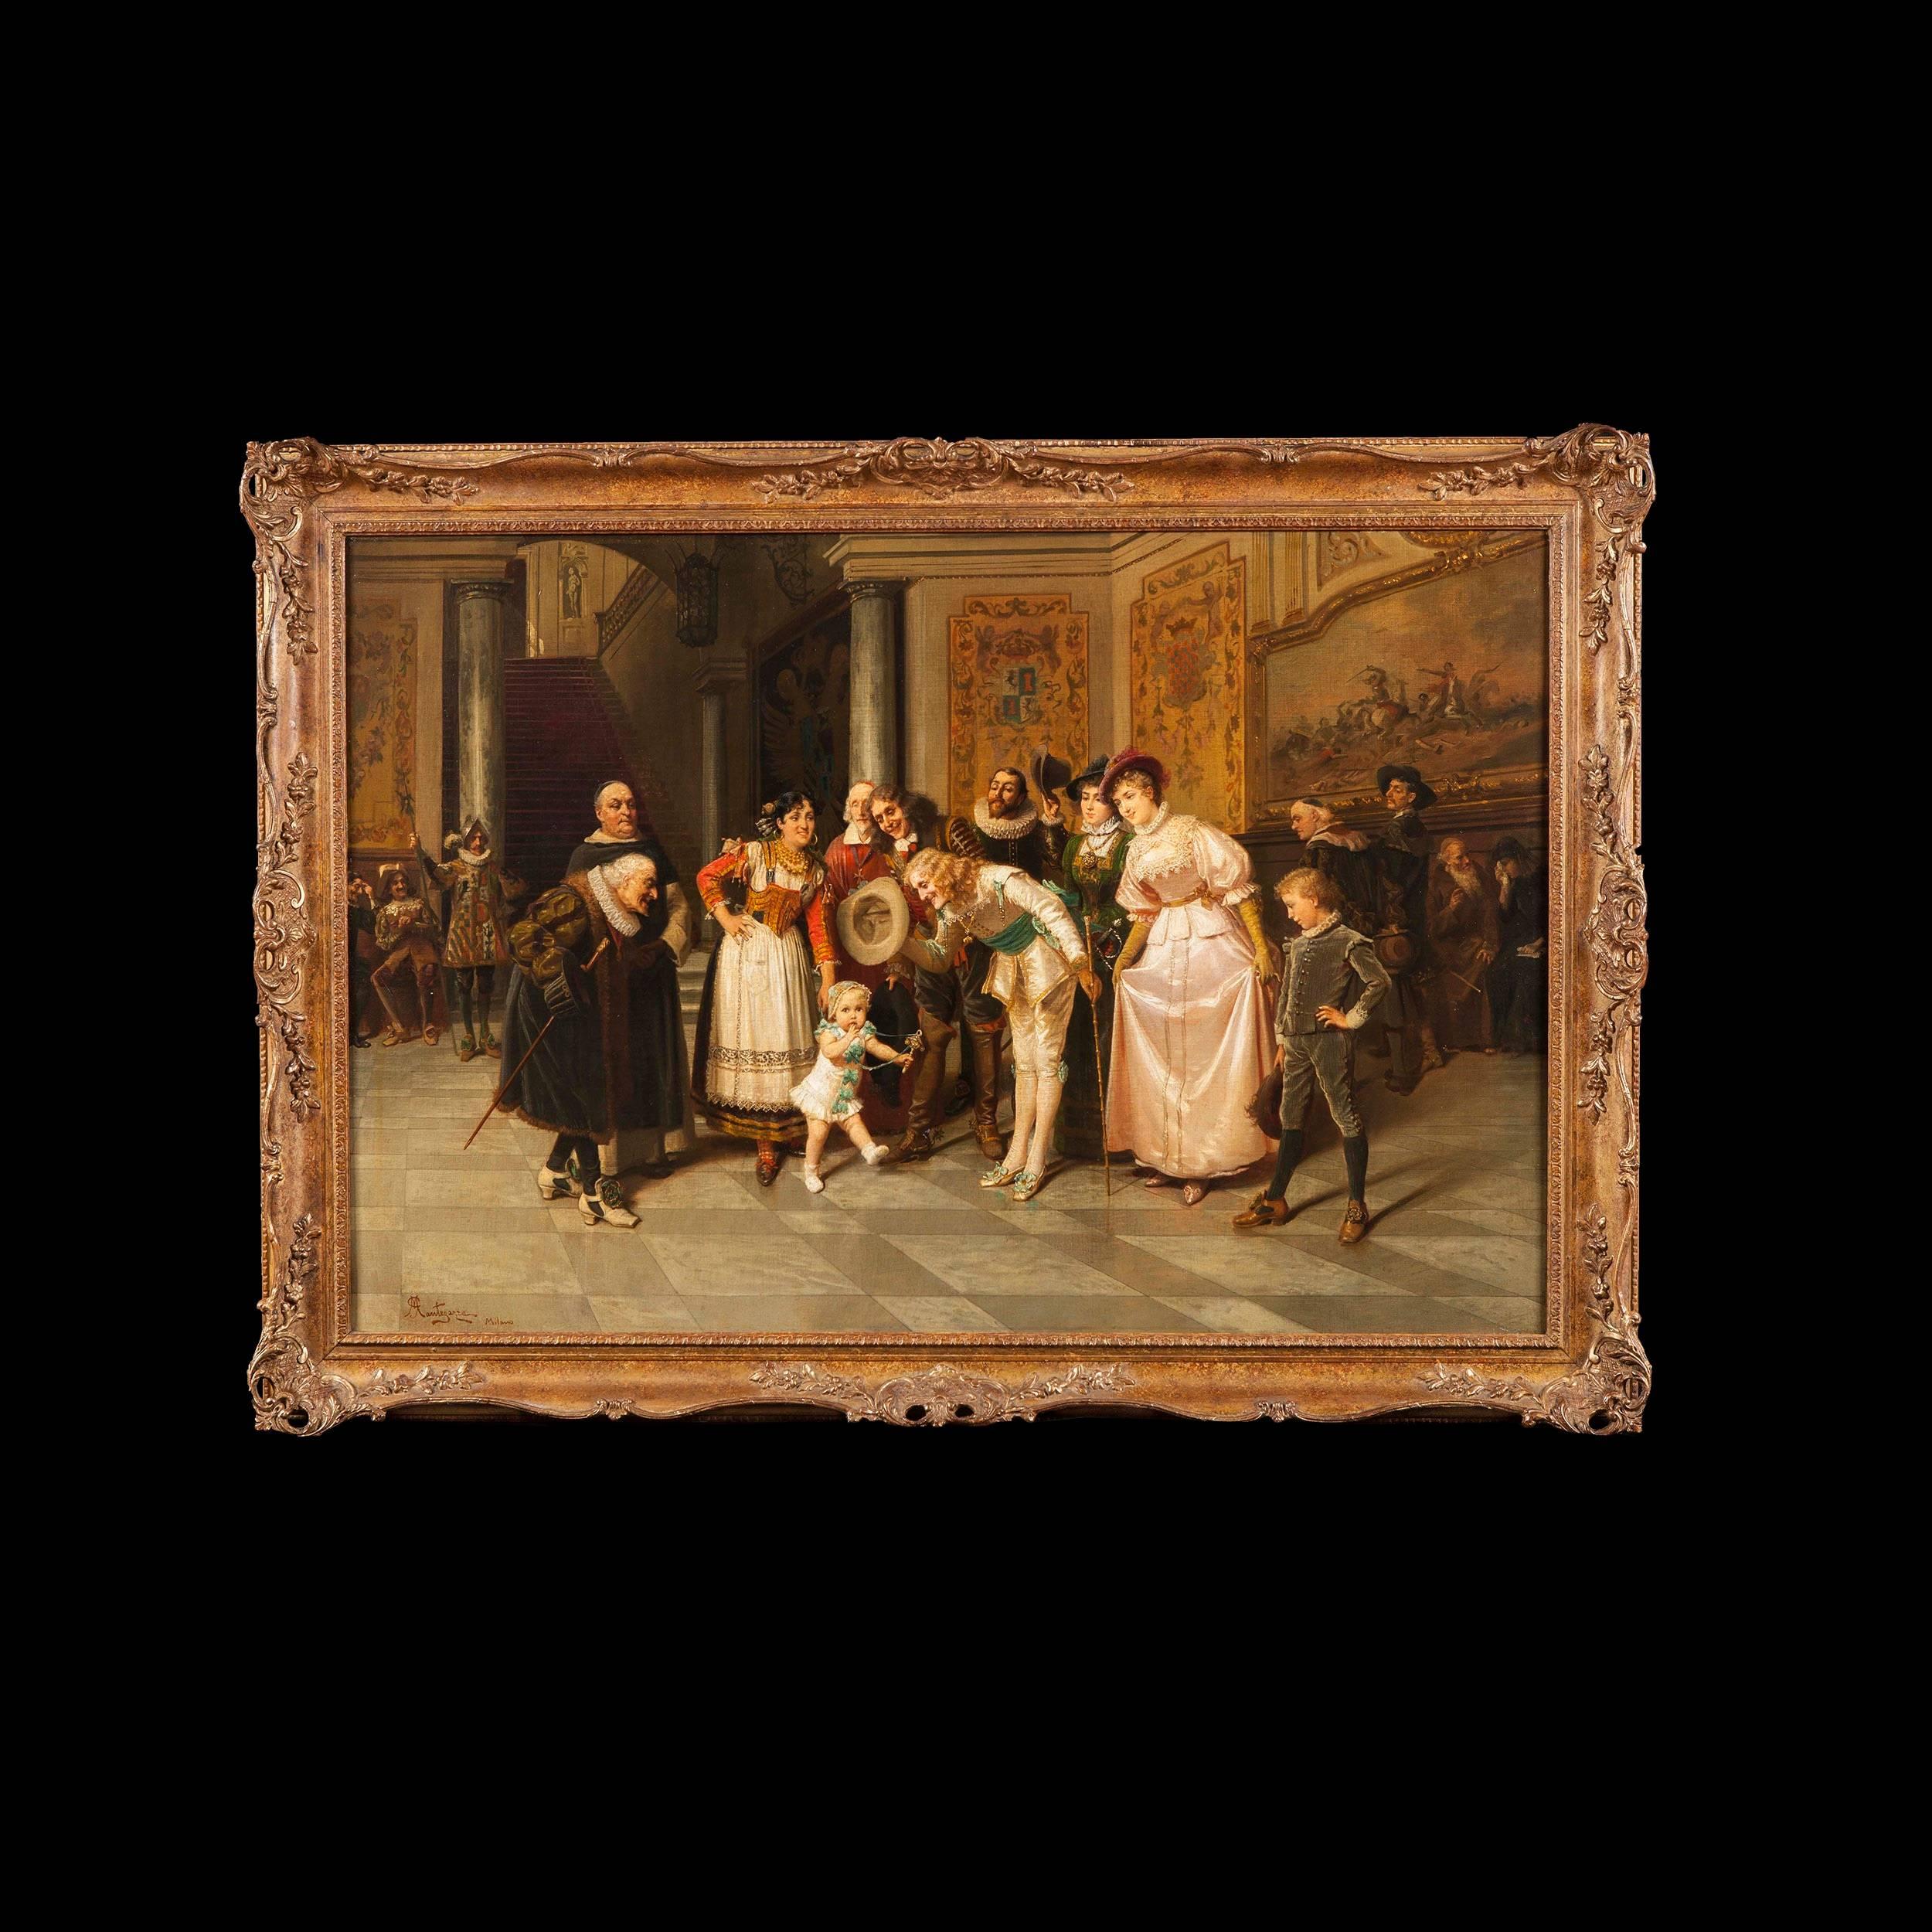 A fine pair of interior scenes by Giacomo Mantegazza

Depicting 'Introduction to Court' and 'The Dancing Lesson', two oil on canvas paintings, in the 18th century manner, signed and inscribed G. Mantegazza Milano, lower left.
Italy

Sight Size: